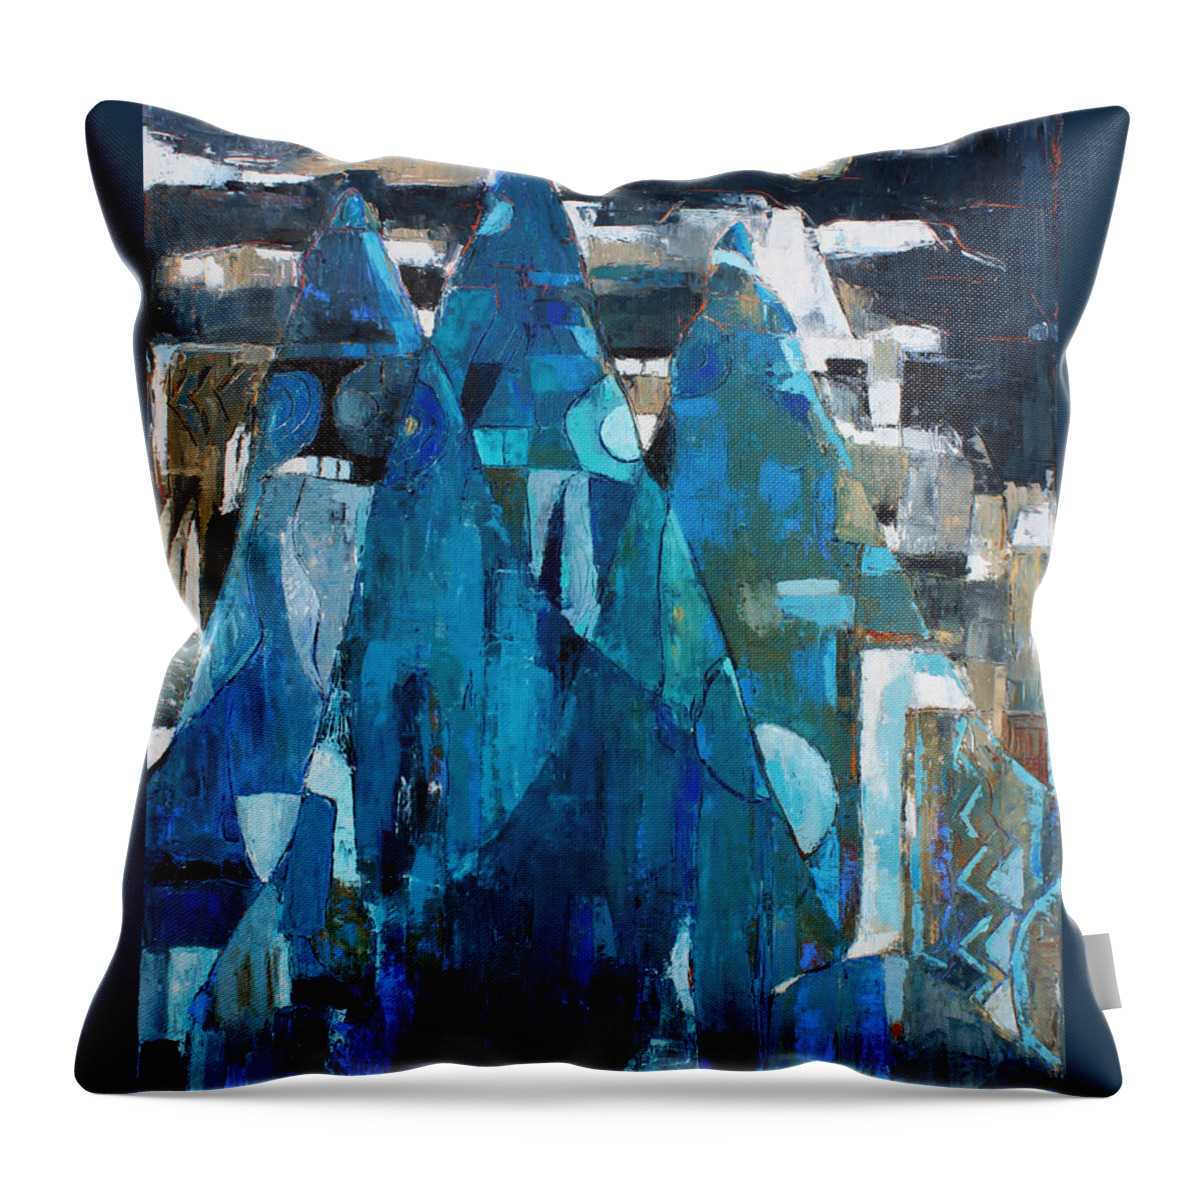 Night Scene Throw Pillow featuring the painting Forgotten Night by Becky Kim